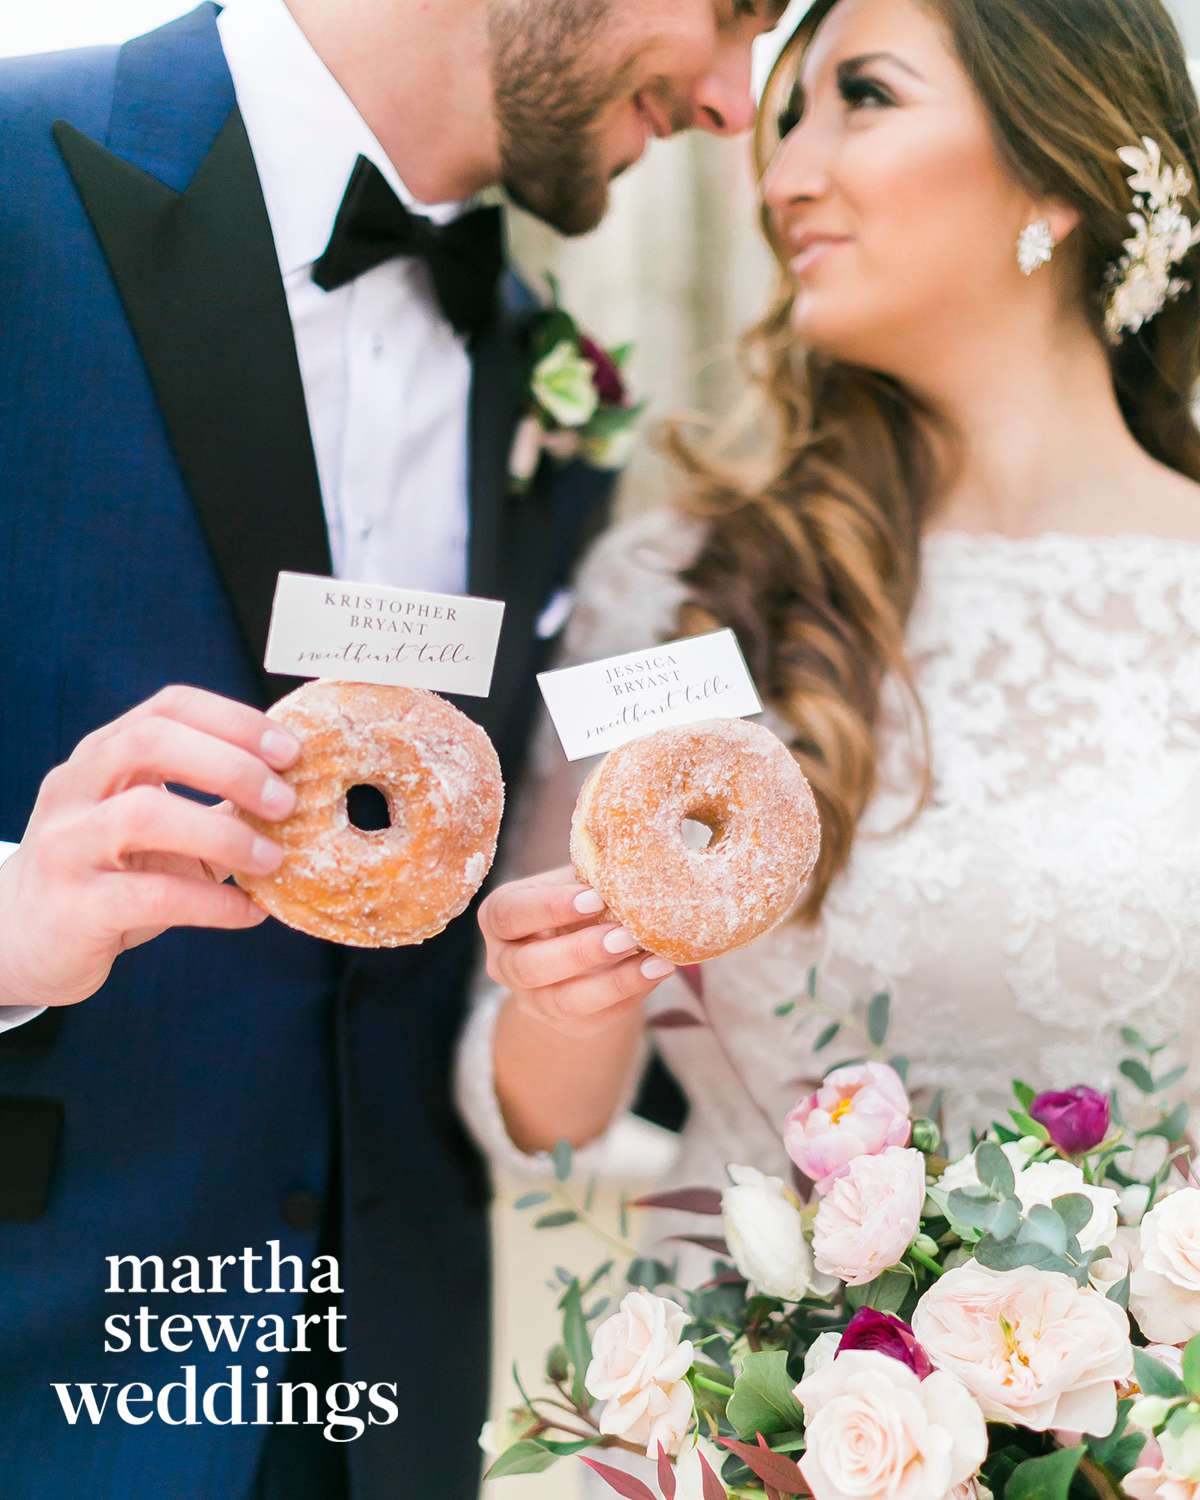 jessica and kris bryant holding donuts